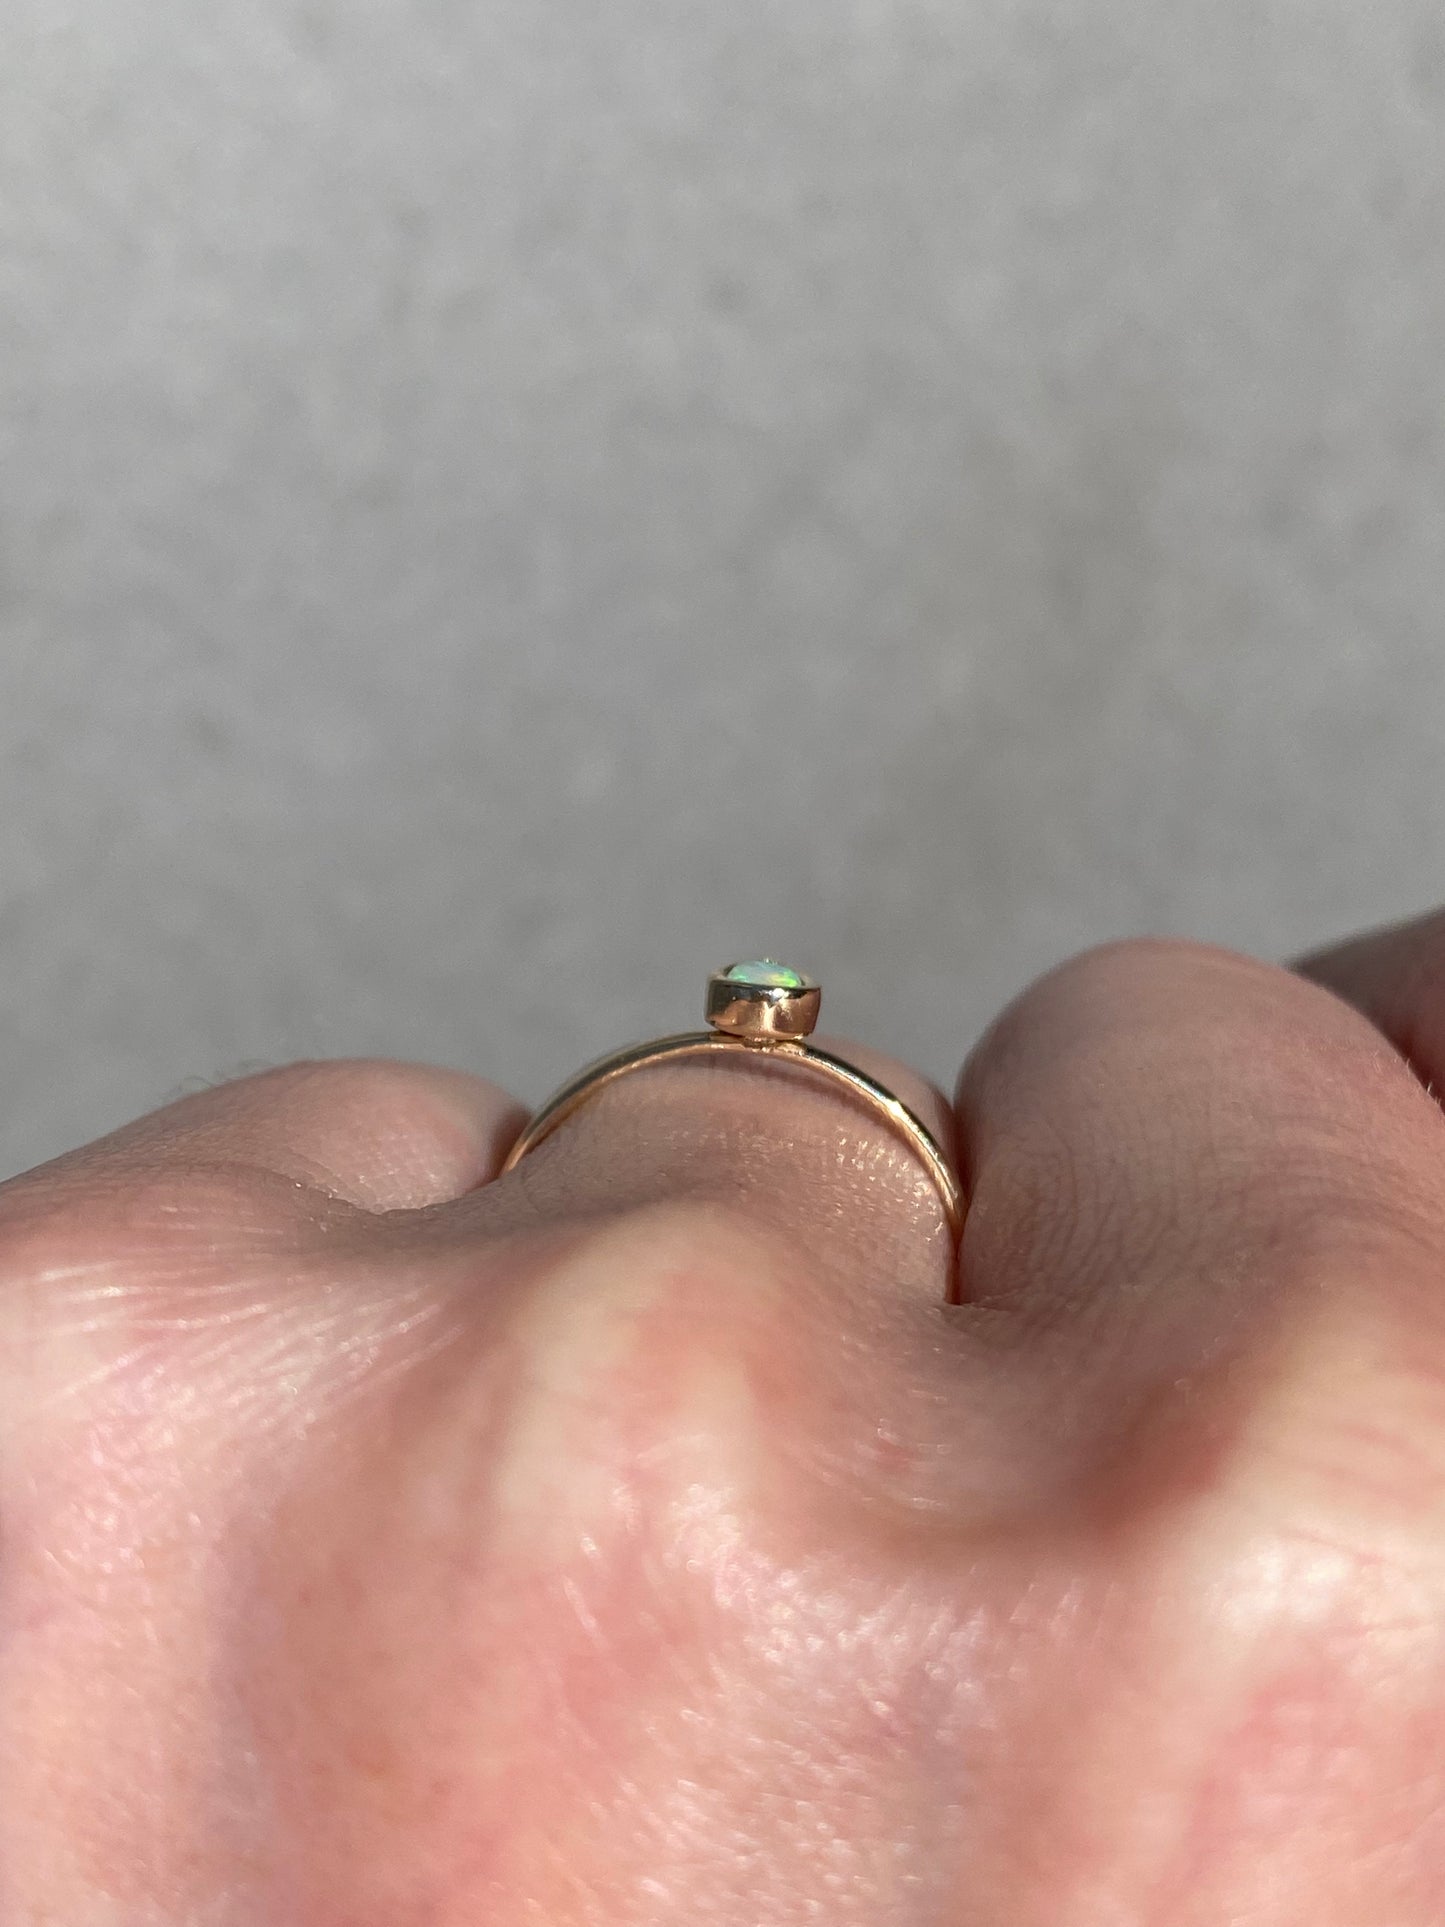 Small drop Opal in 14k yellow gold ring